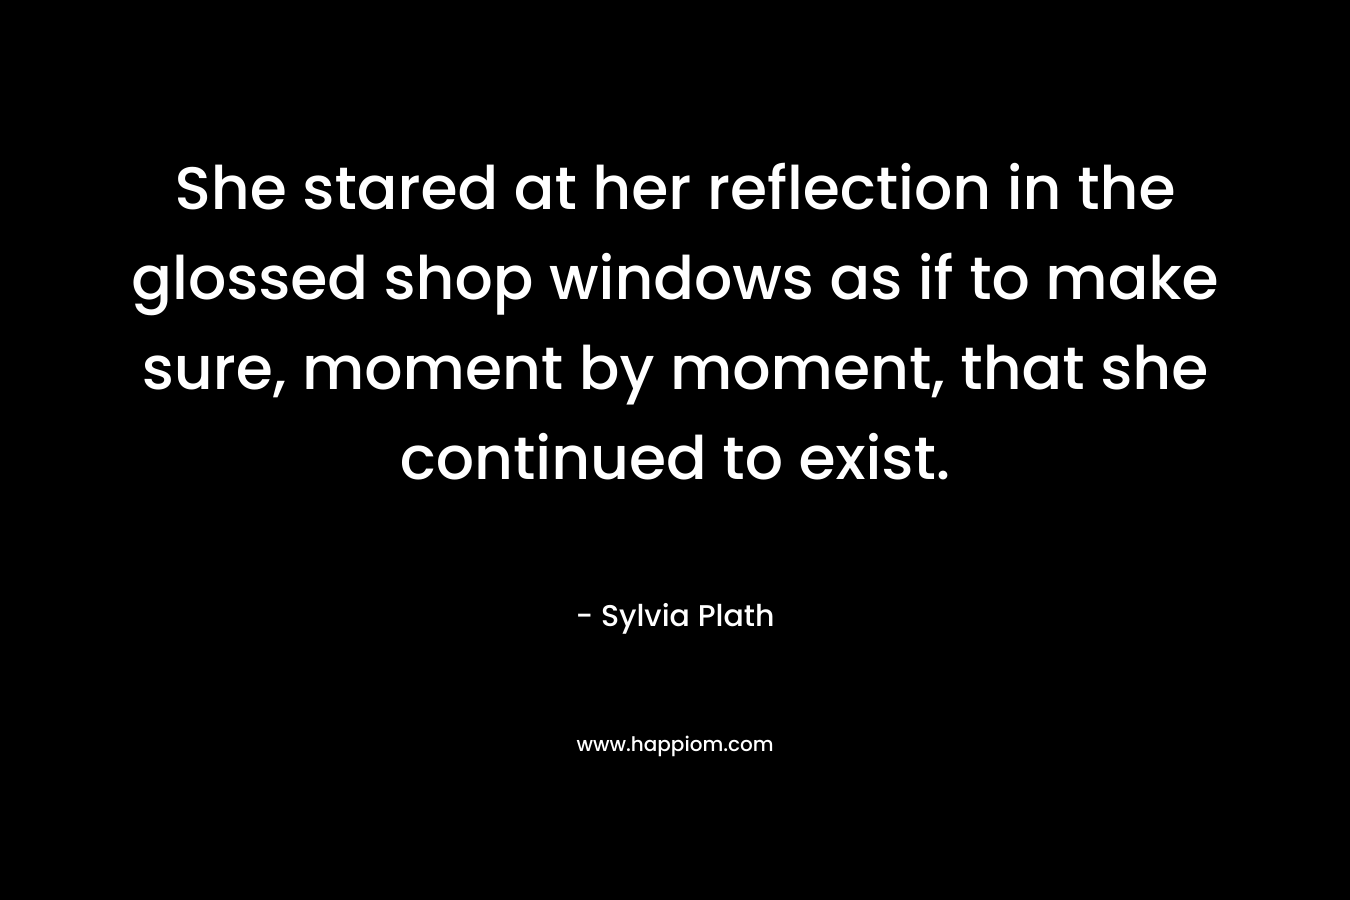 She stared at her reflection in the glossed shop windows as if to make sure, moment by moment, that she continued to exist. – Sylvia Plath